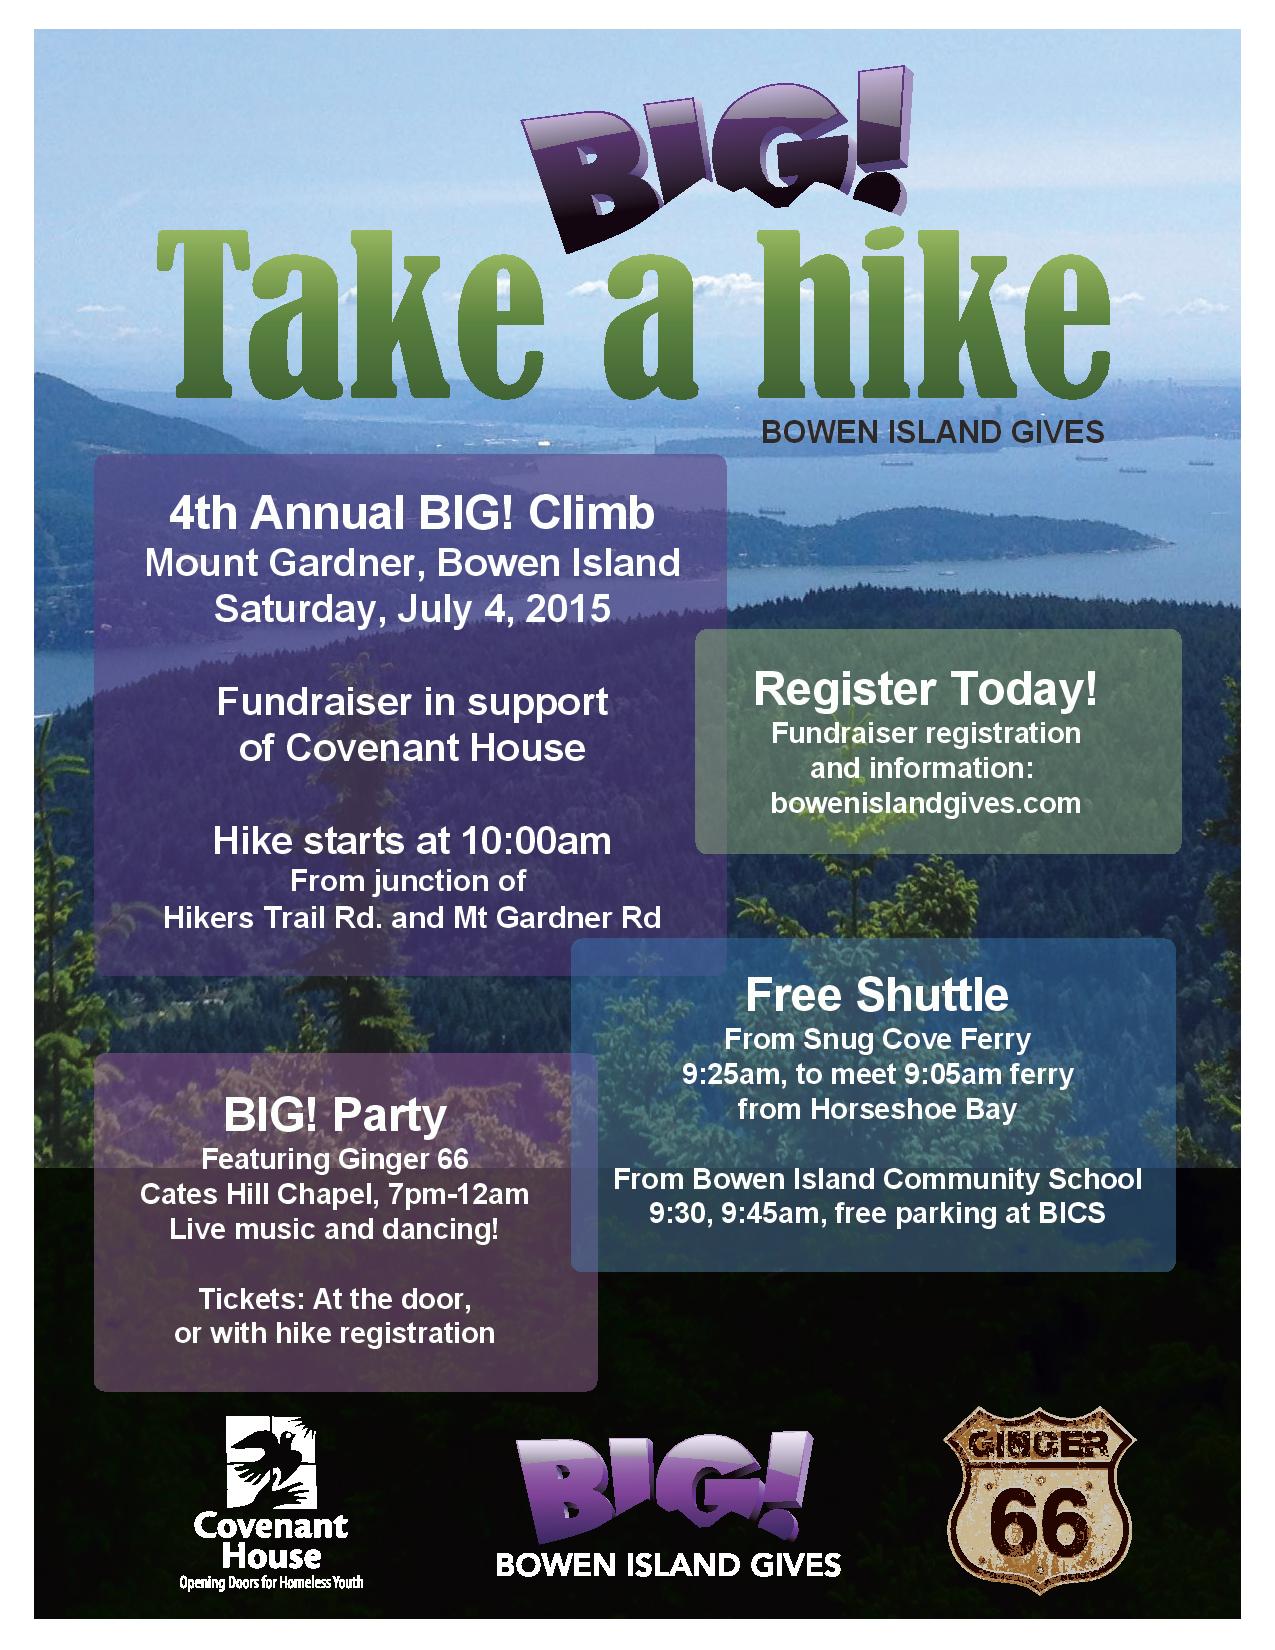 Want to get outside tomorrow? Join us for the Big Hike on Bowen Island!